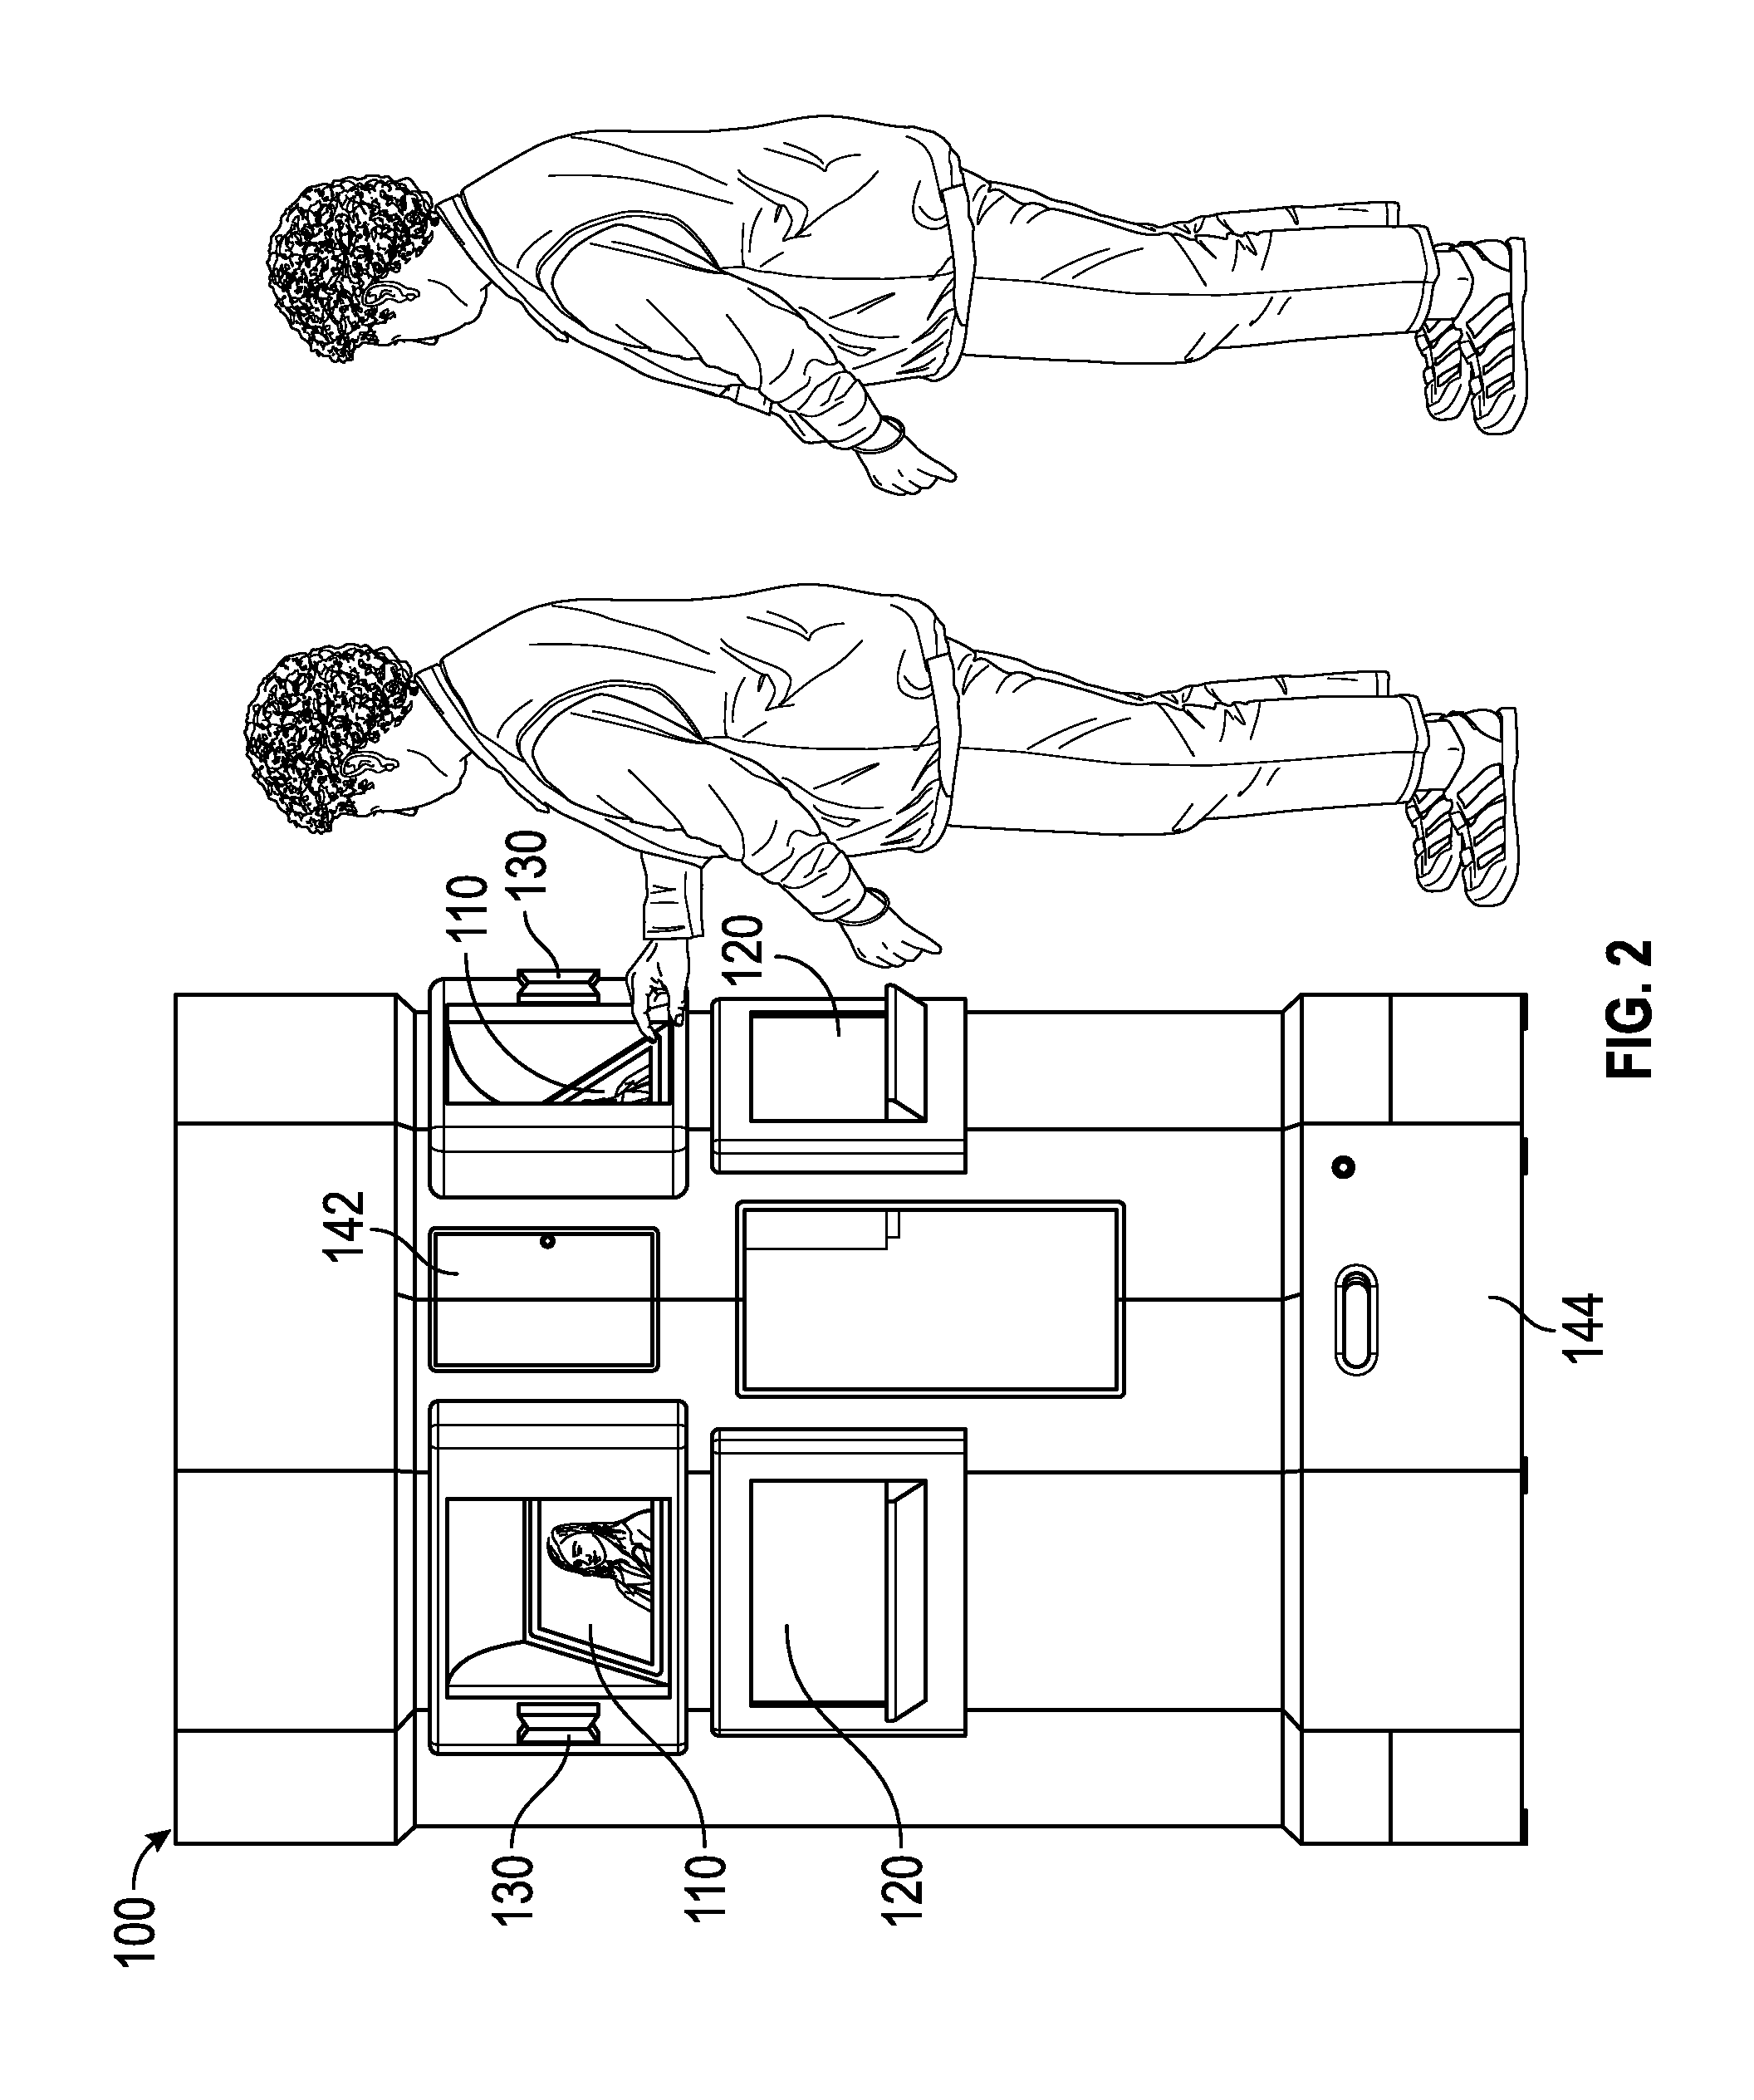 Systems and methods for dispensing prescription medication using a medication dispensing machine